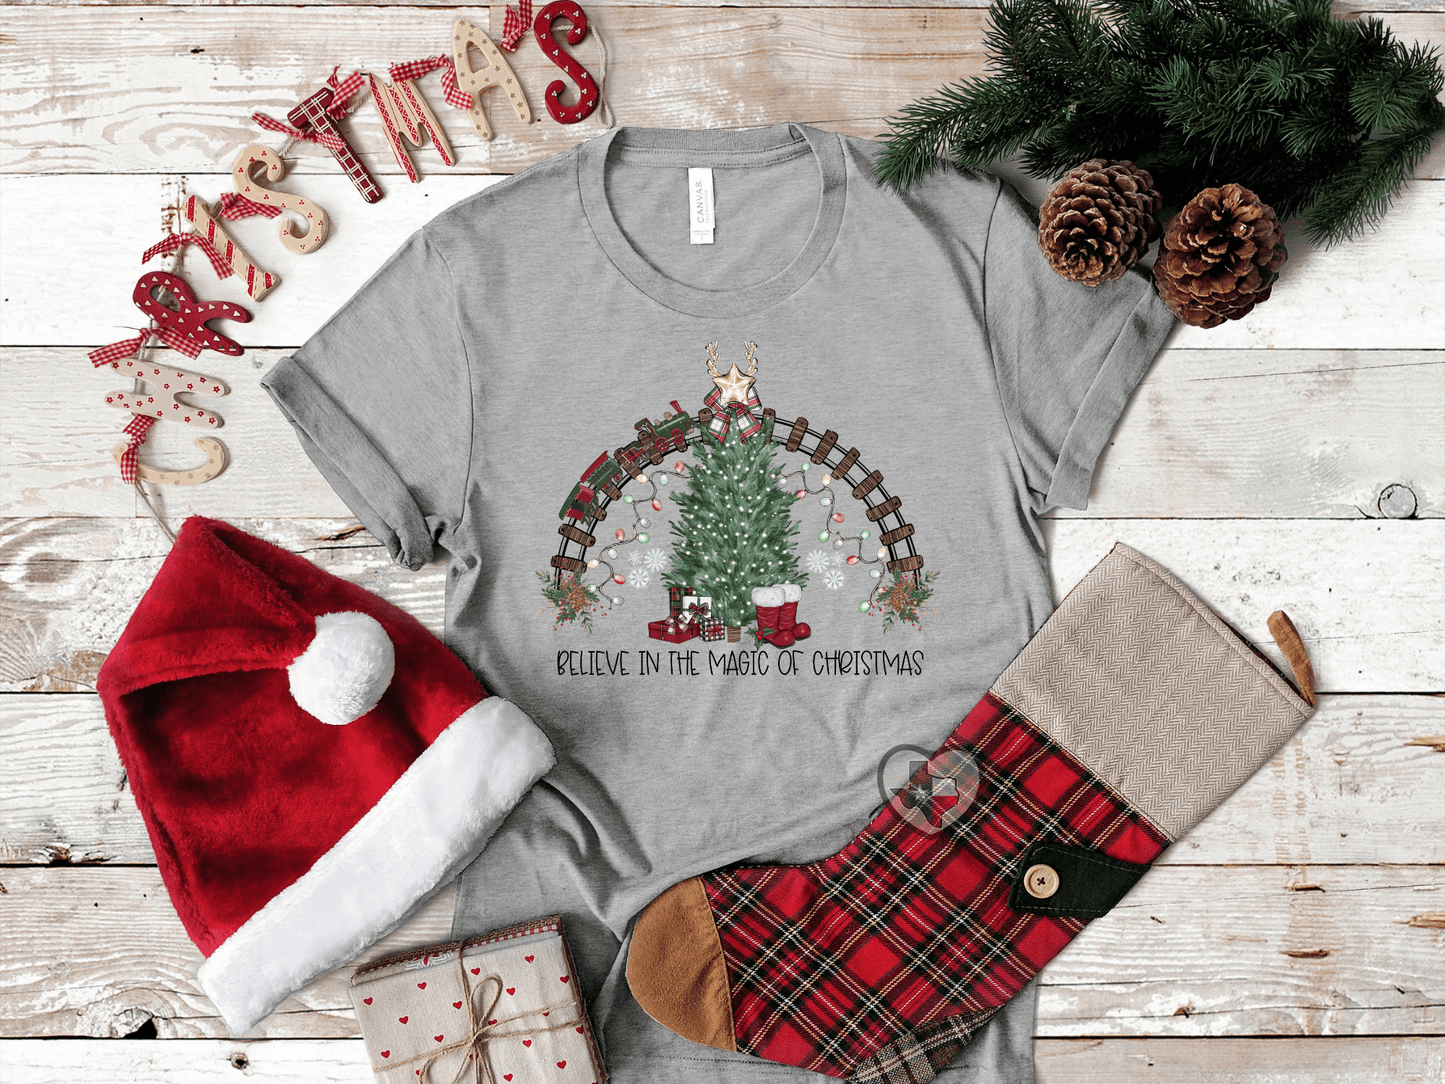 Believe in the Magic of Christmas HIGH HEAT - Texas Transfers and Designs